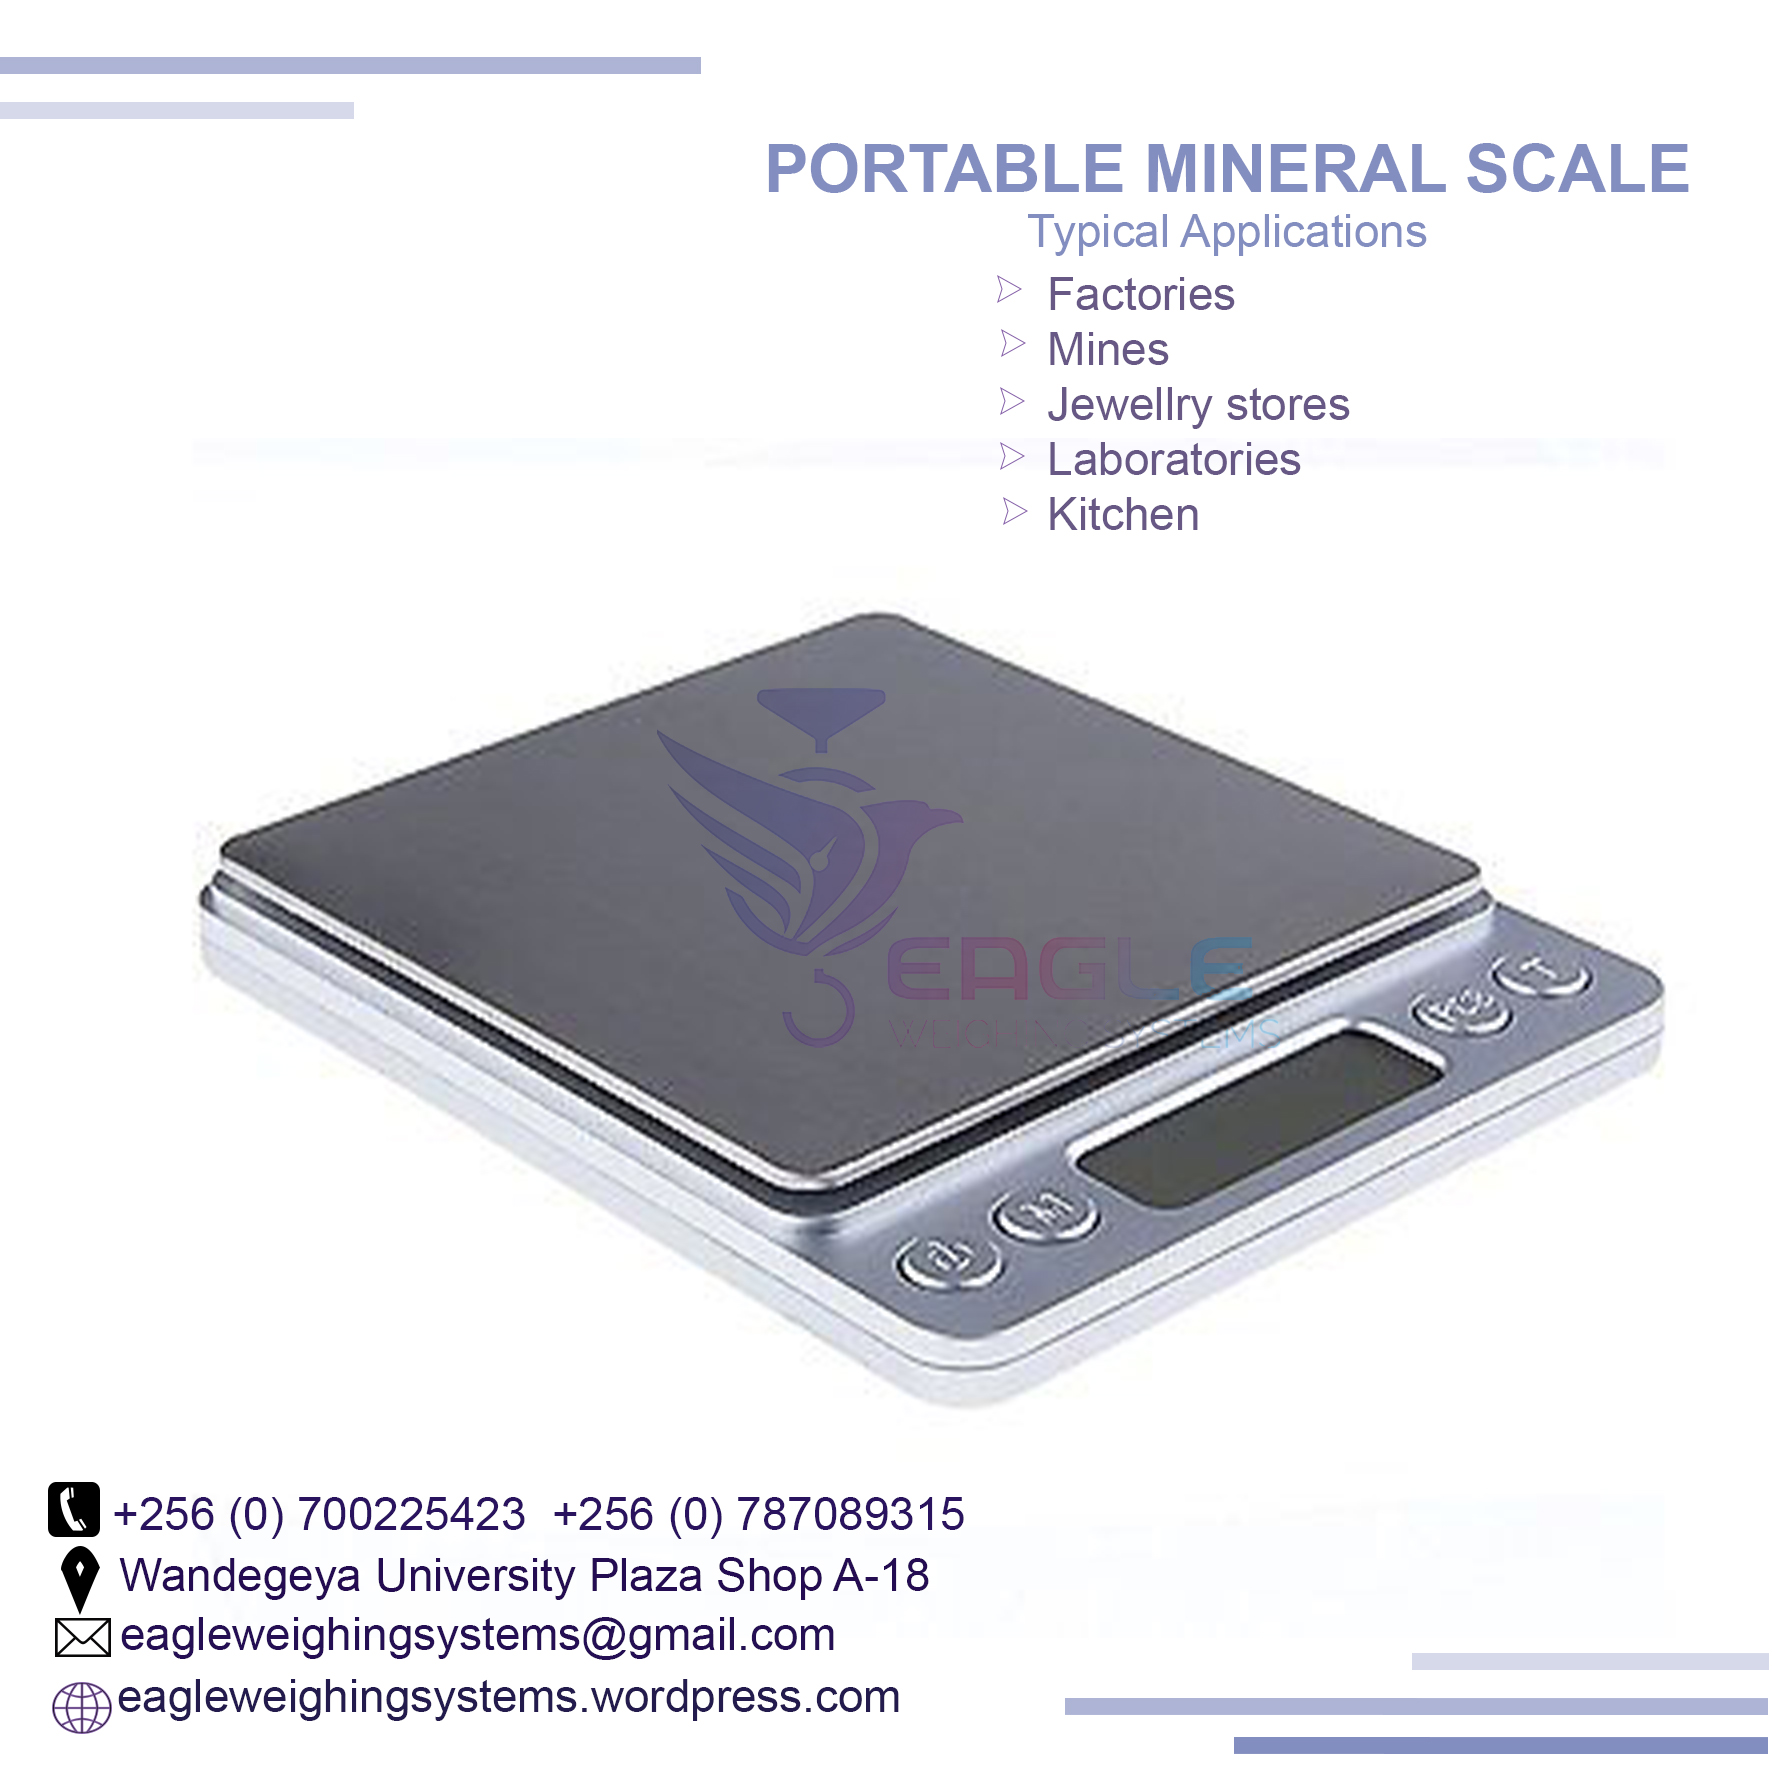 Table top electronic Portable mineral, jewelry scales in Kampala Uganda, Kampala Central Division, Central, Uganda